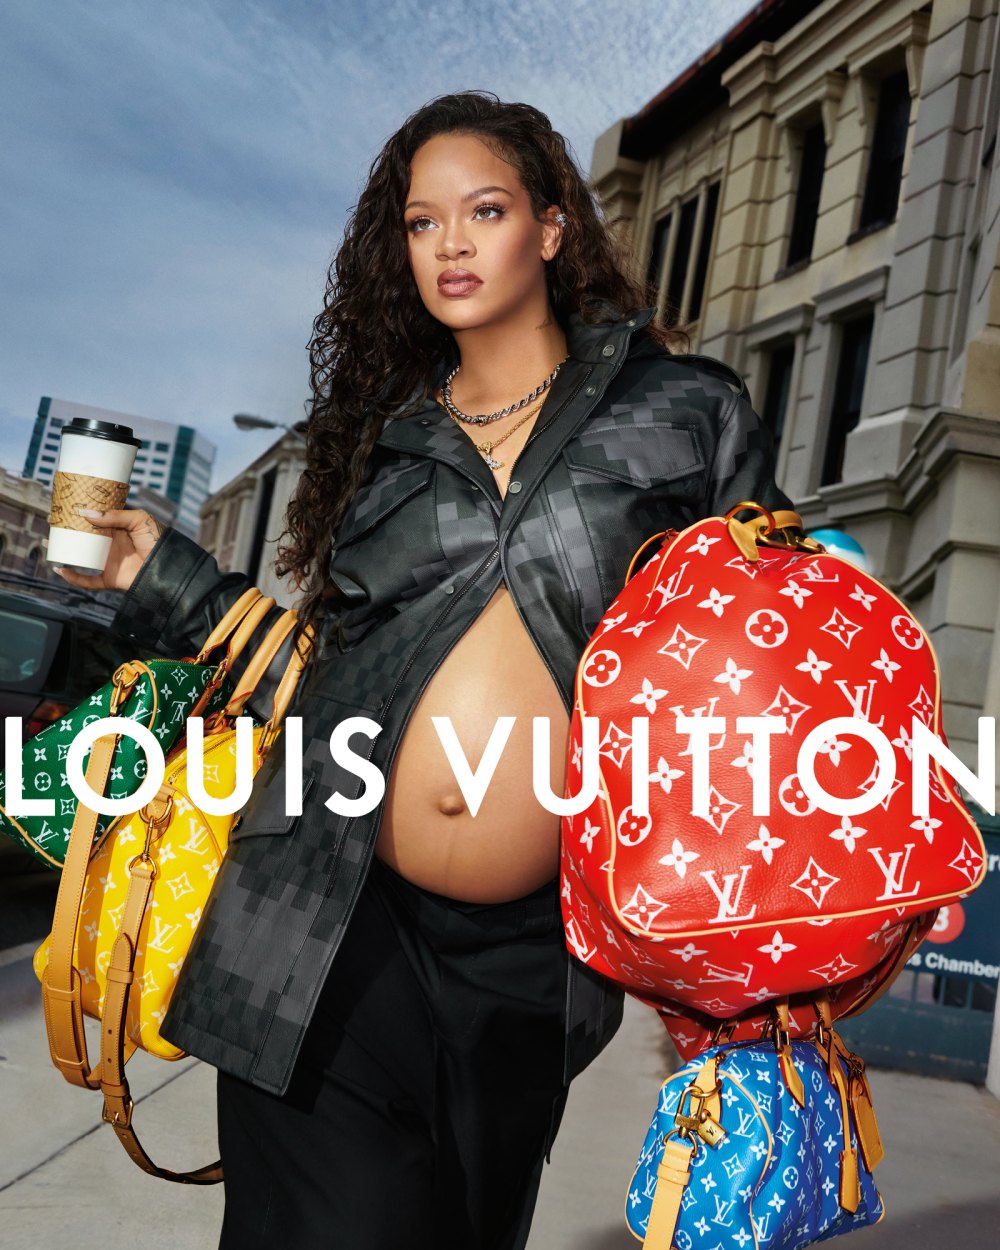 Revealed: the Romanian site where Louis Vuitton makes its Italian